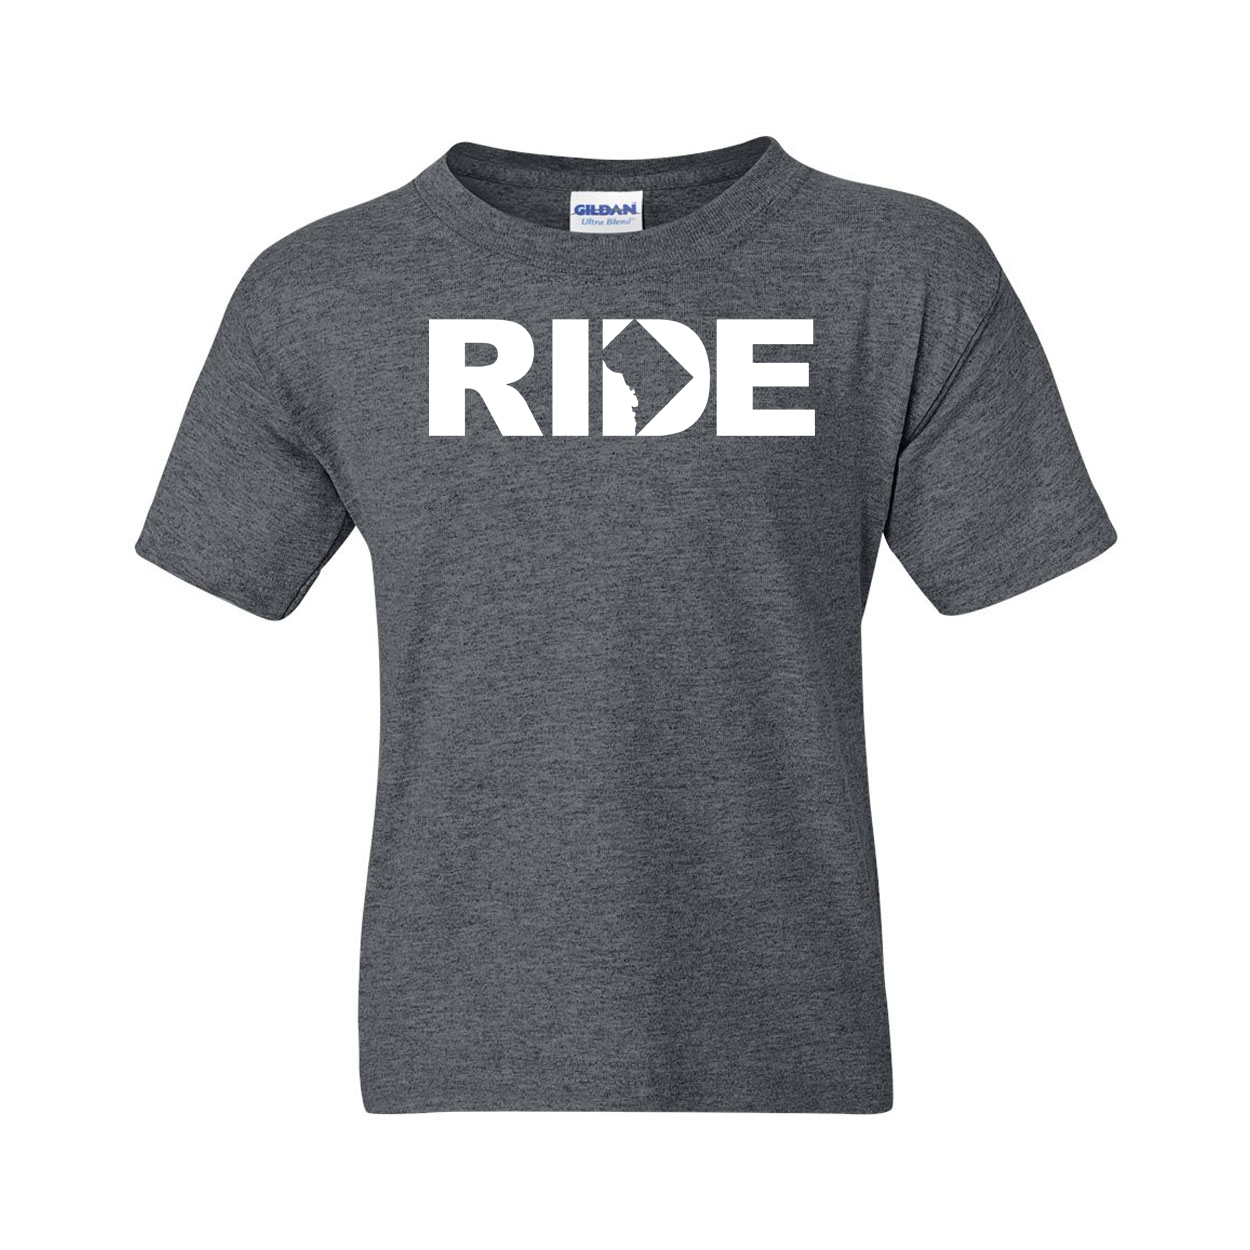 Ride District of Columbia Classic Youth T-Shirt Dark Heather Gray (White Logo)